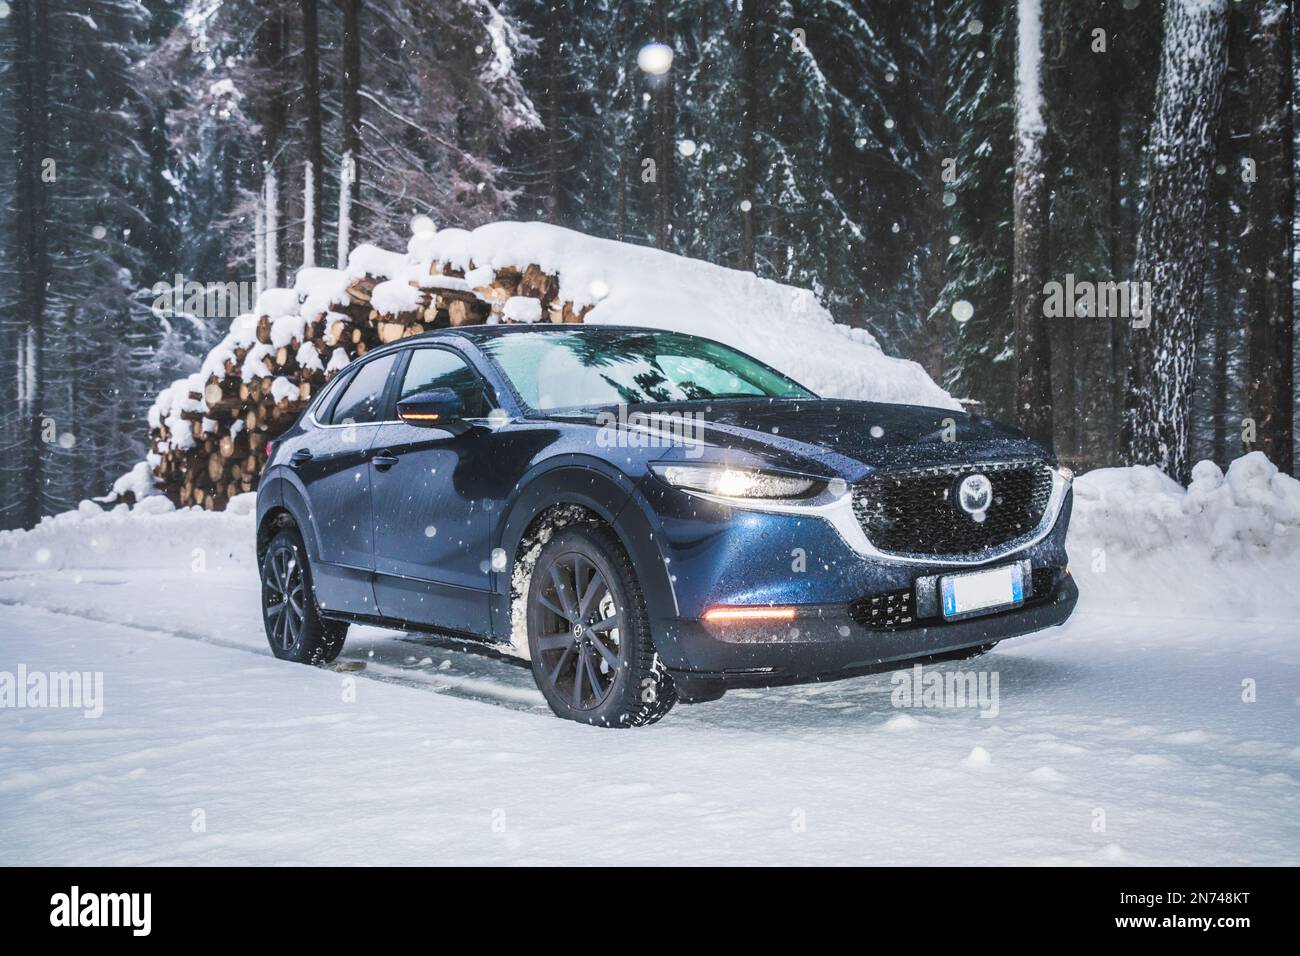 Italy, Veneto, Belluno, a Mazda Motor Corp. CX-30 crossover sport utility vehicle (SUV) on a mountain road in winter during a snowfall, Dolomites Stock Photo